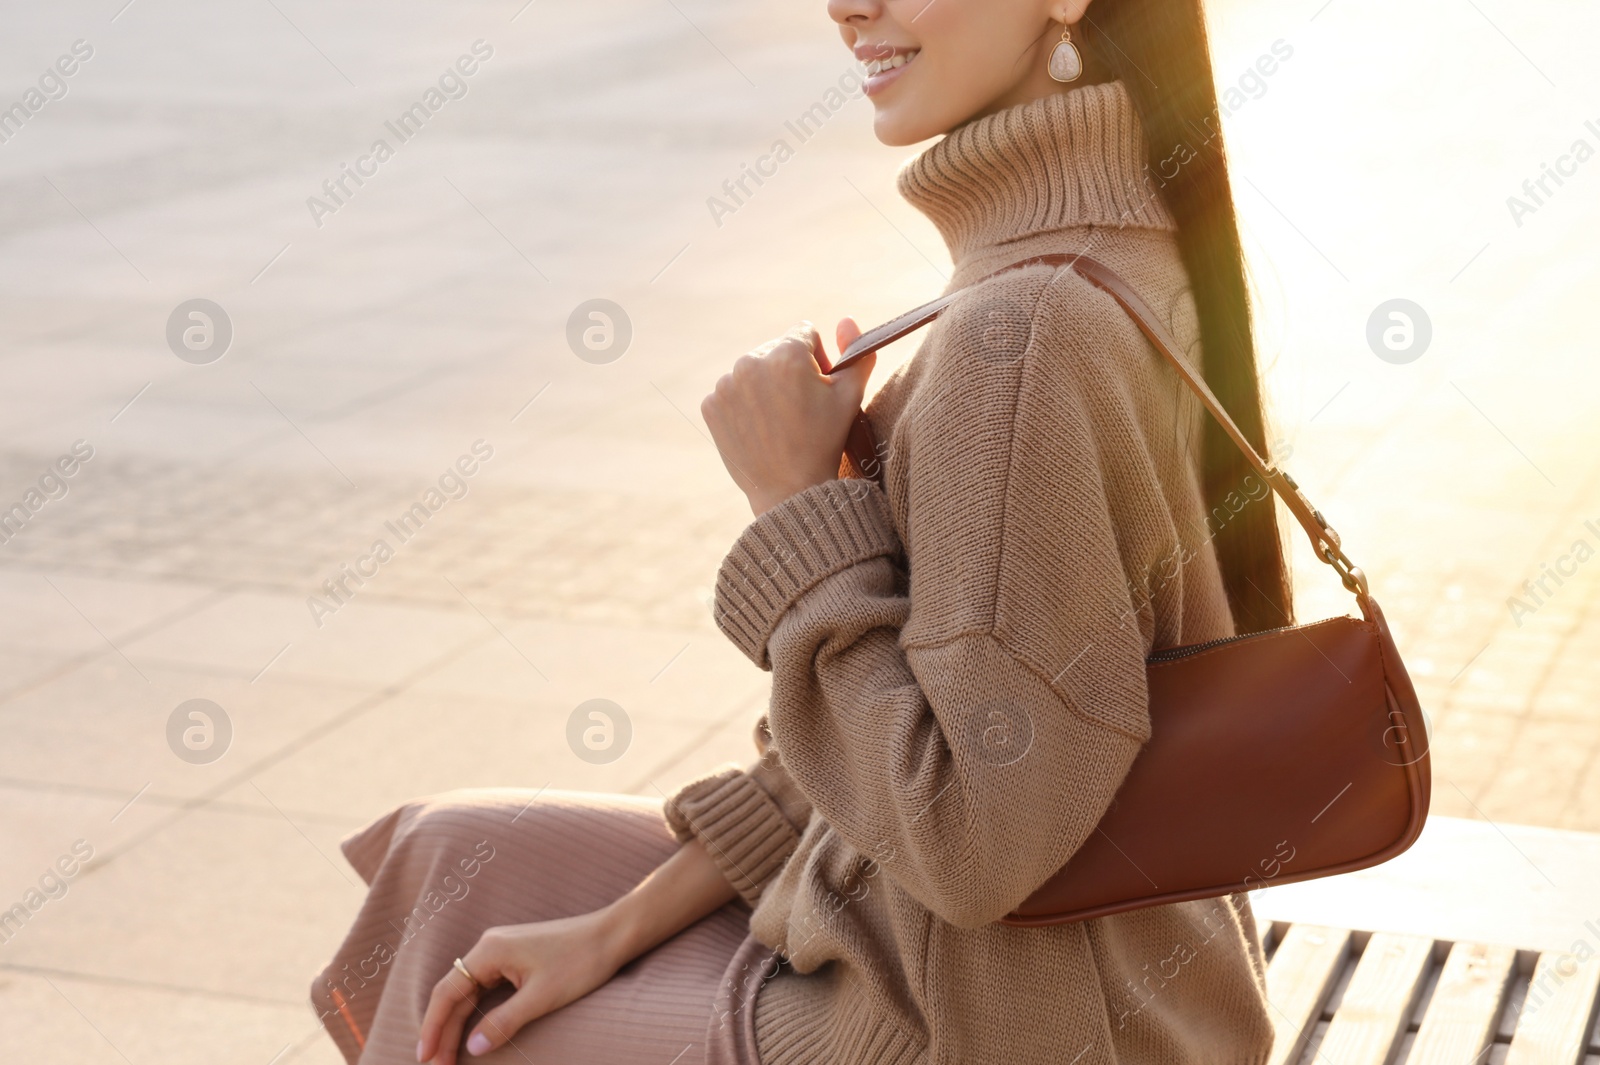 Photo of Fashionable young woman with stylish bag on bench outdoors, closeup